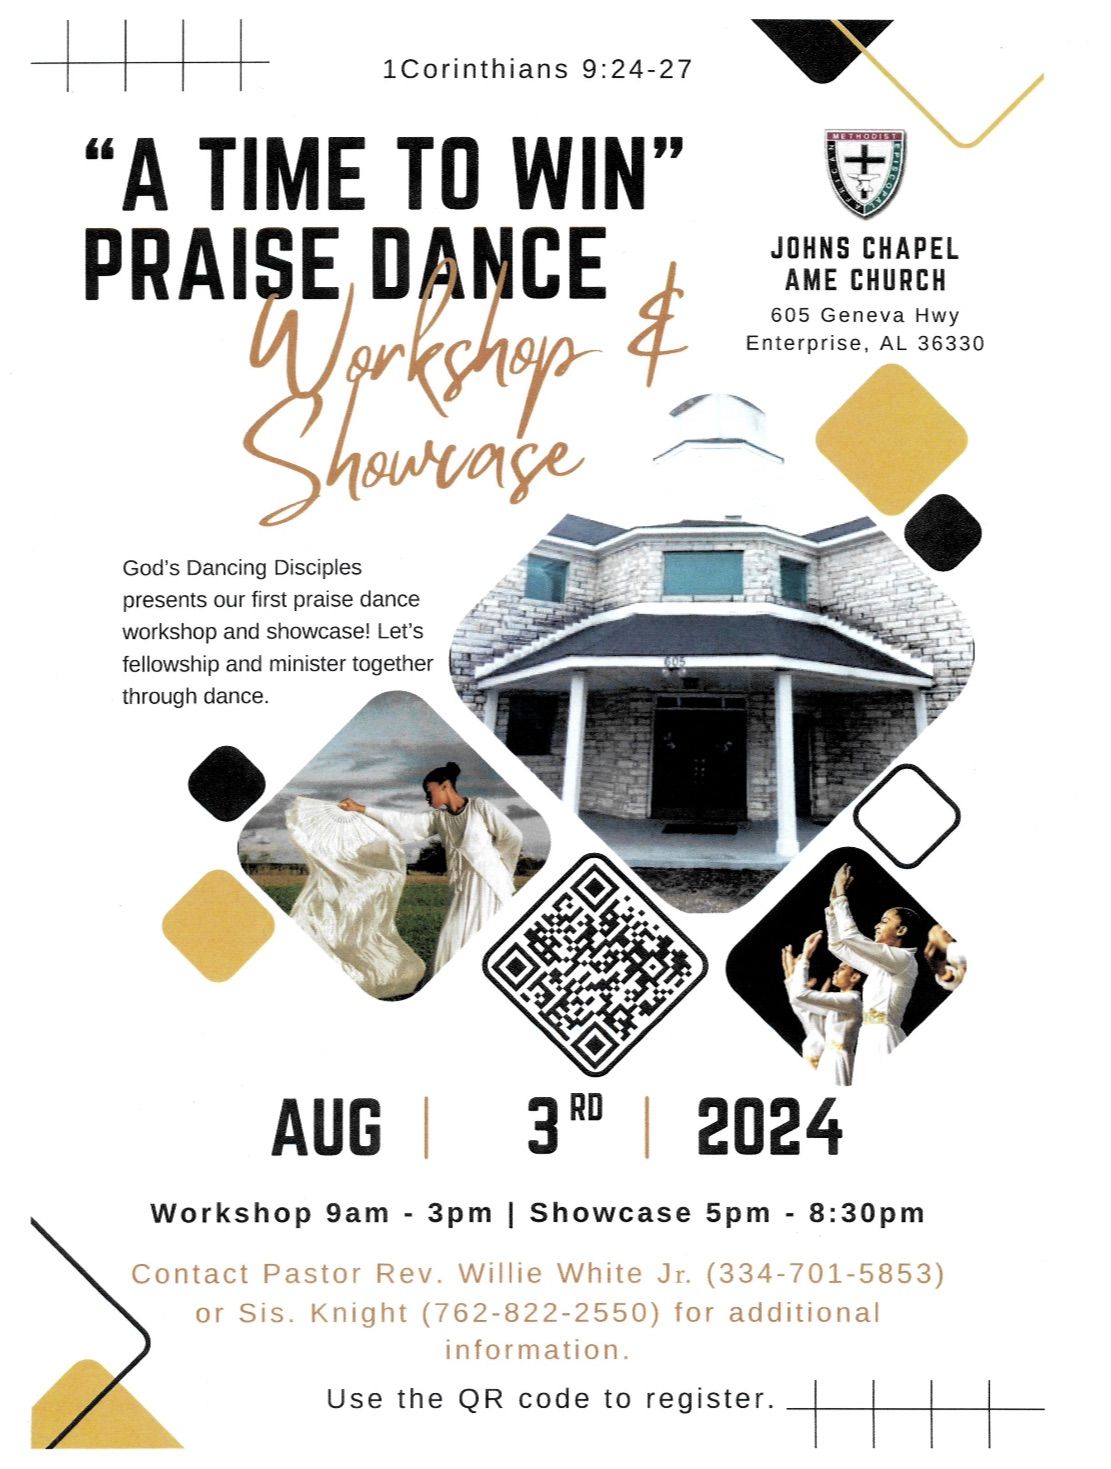 A Time to Win Praise Dance Workshop and Showcase 